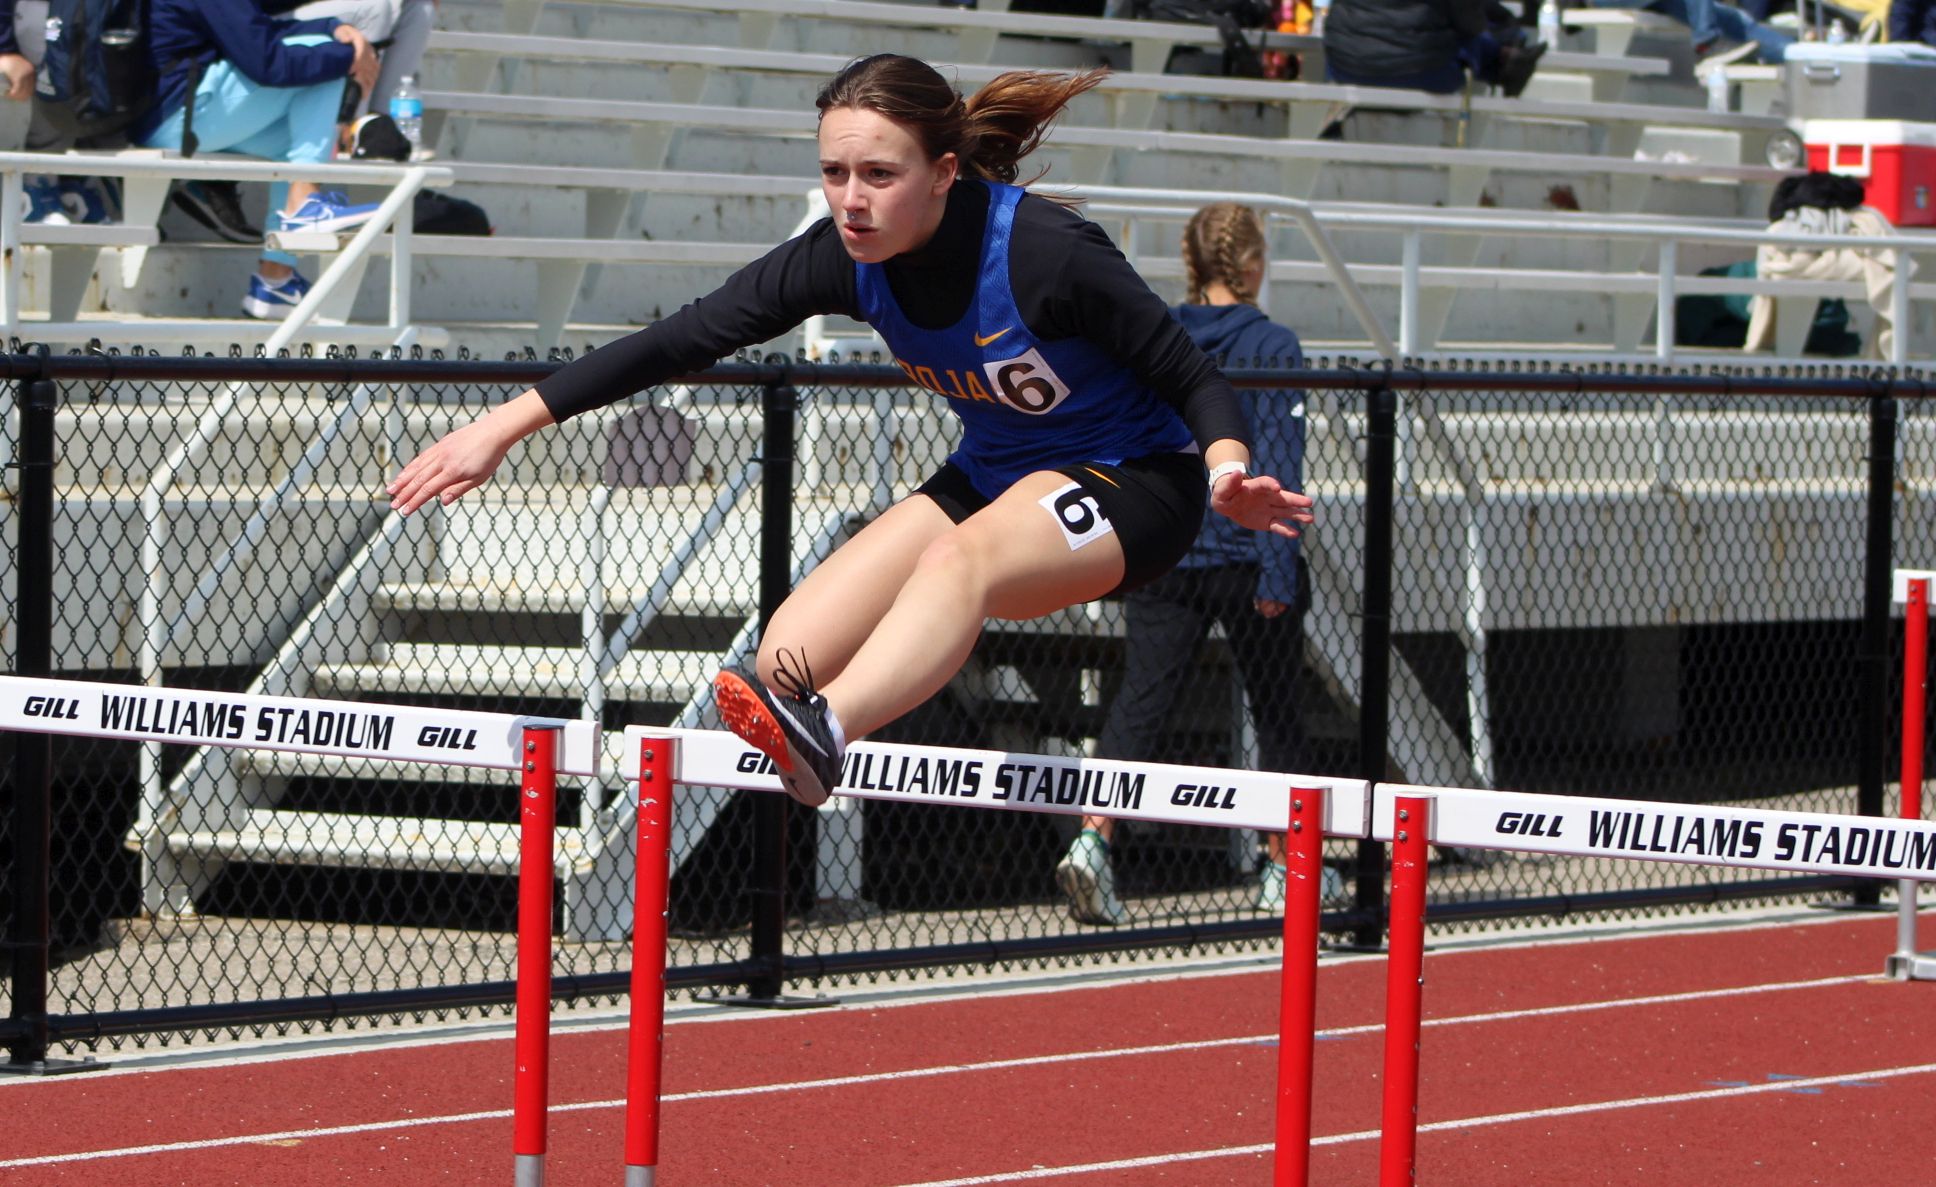 NIACC's Tara Backhaus runs to first-place finish in the 100-meter hurdles Saturday at the Grand View Viking Relays in Des Moines.